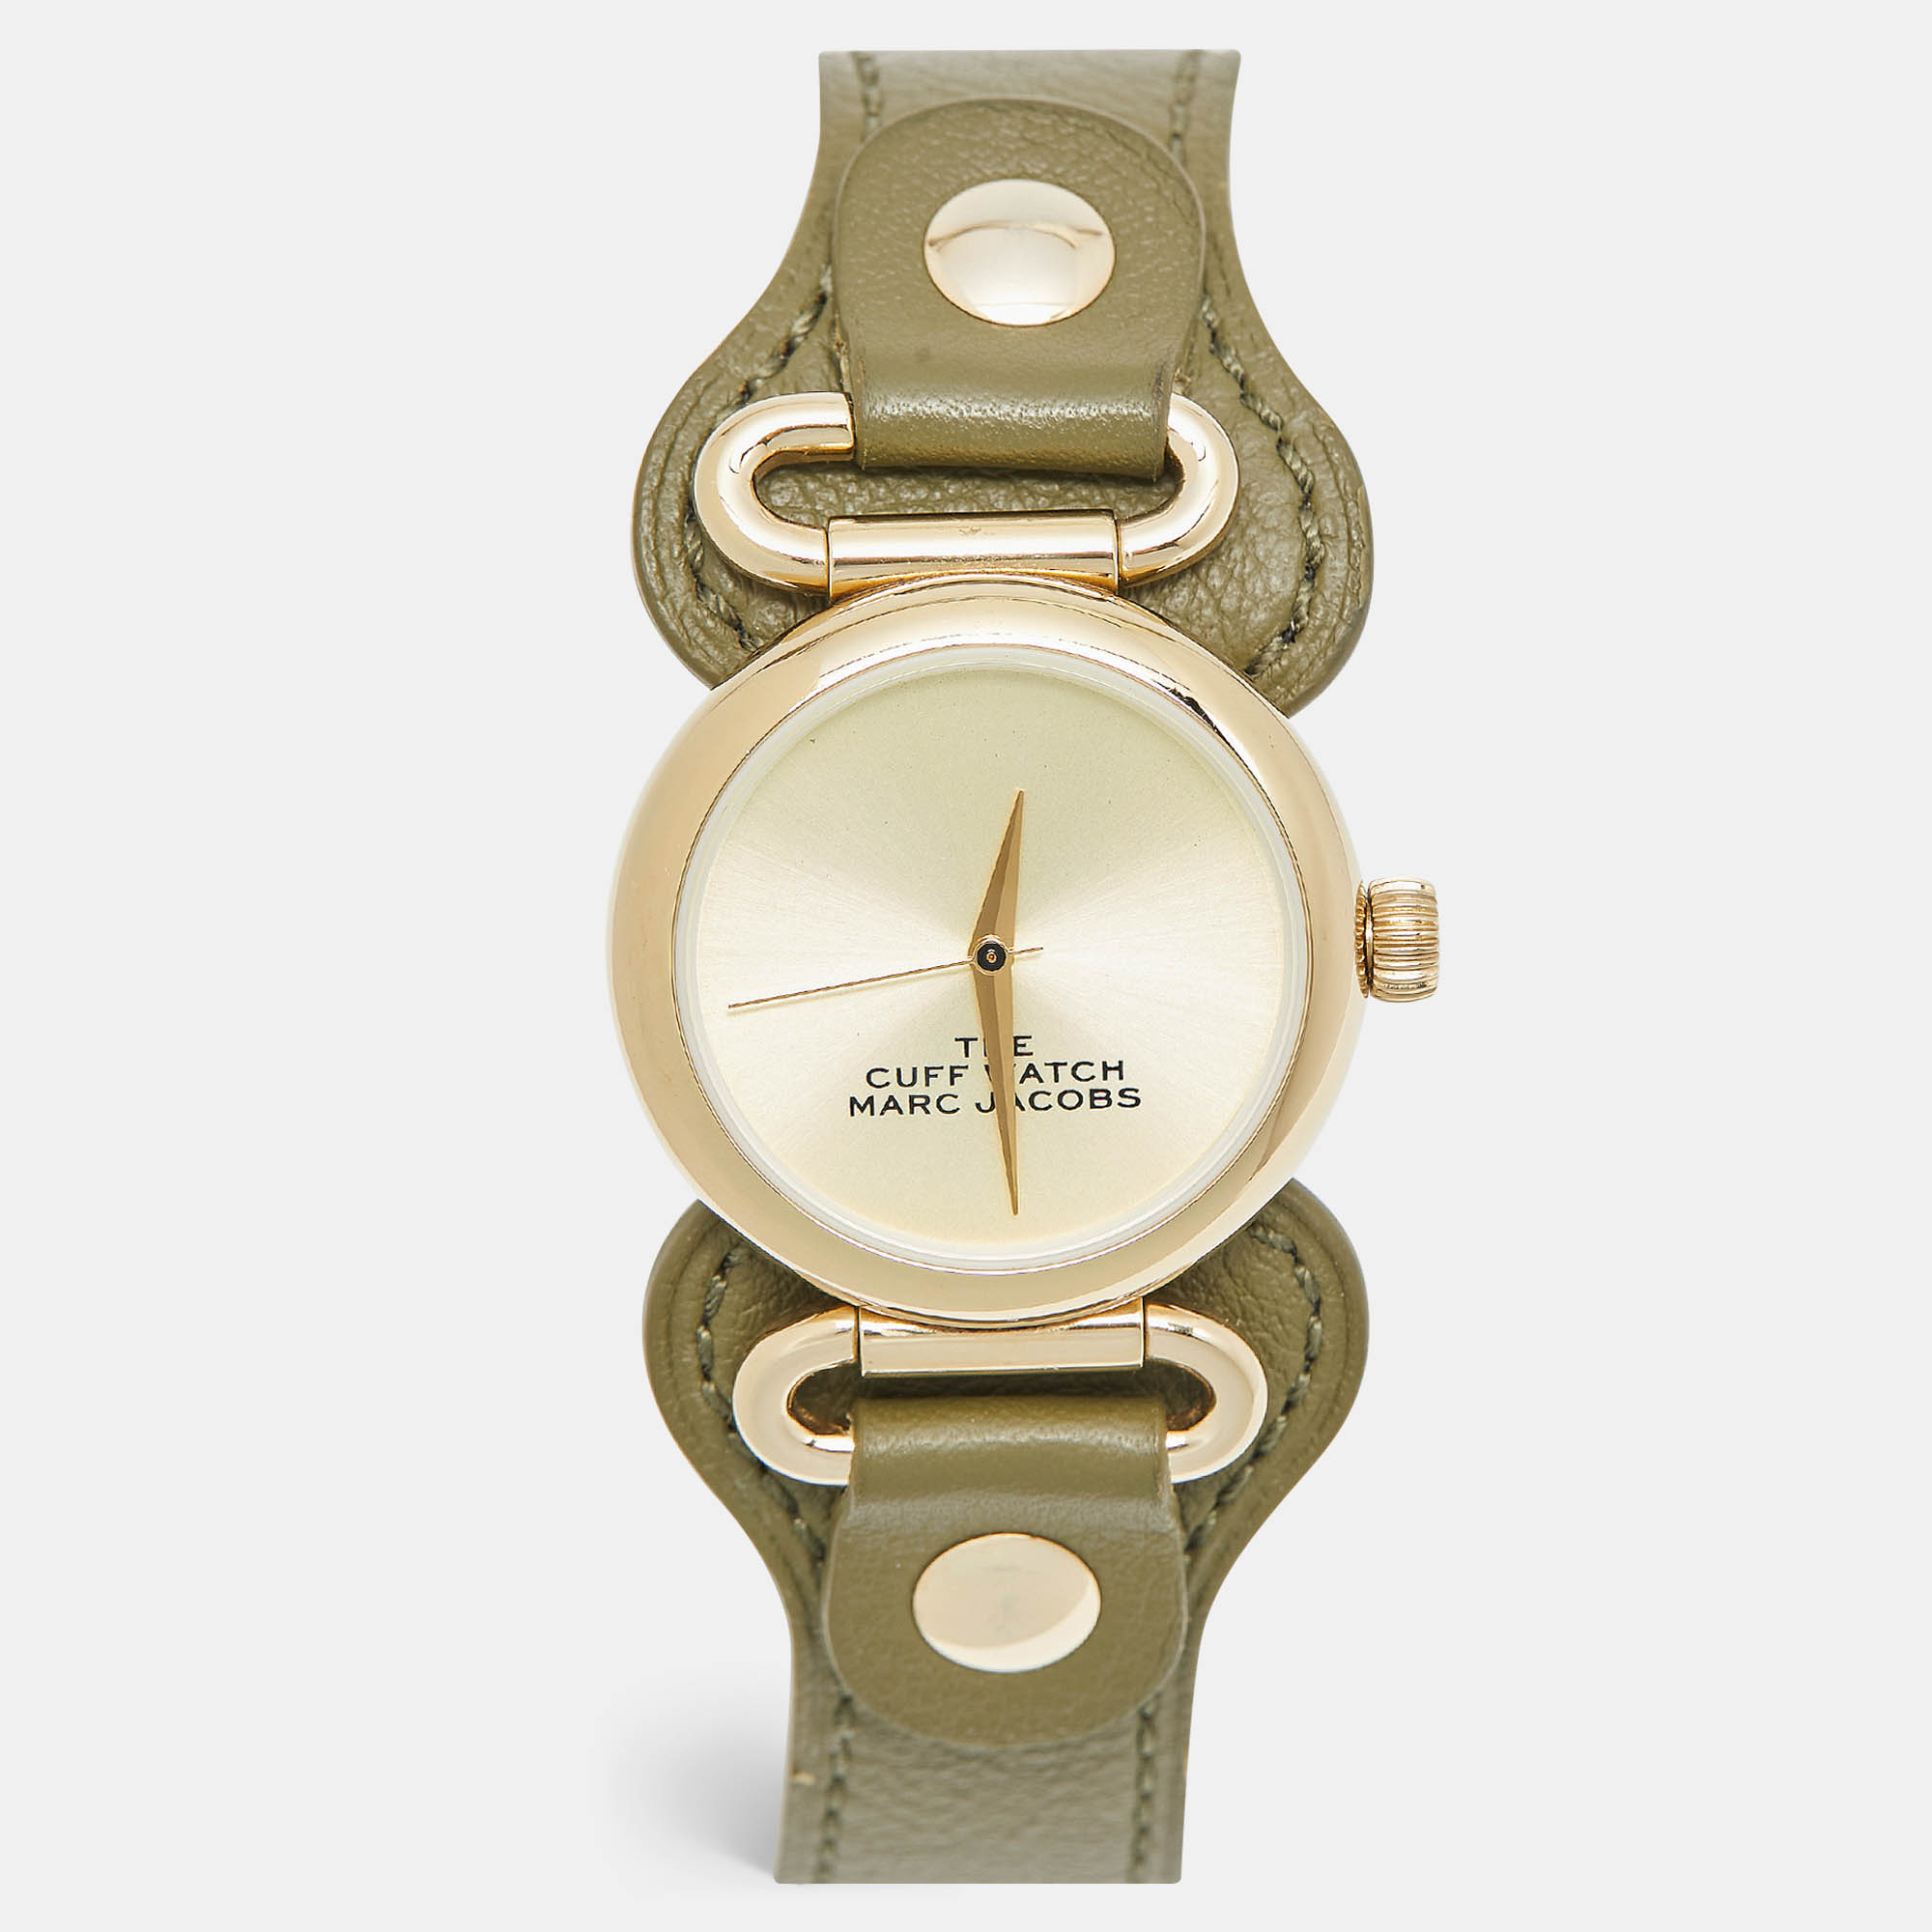 

Marc Jacobs Champagne Gold PVD Coated Stainless Steel Leather The Cuff Watch MJO120179289 Women's Wristwatch, Green